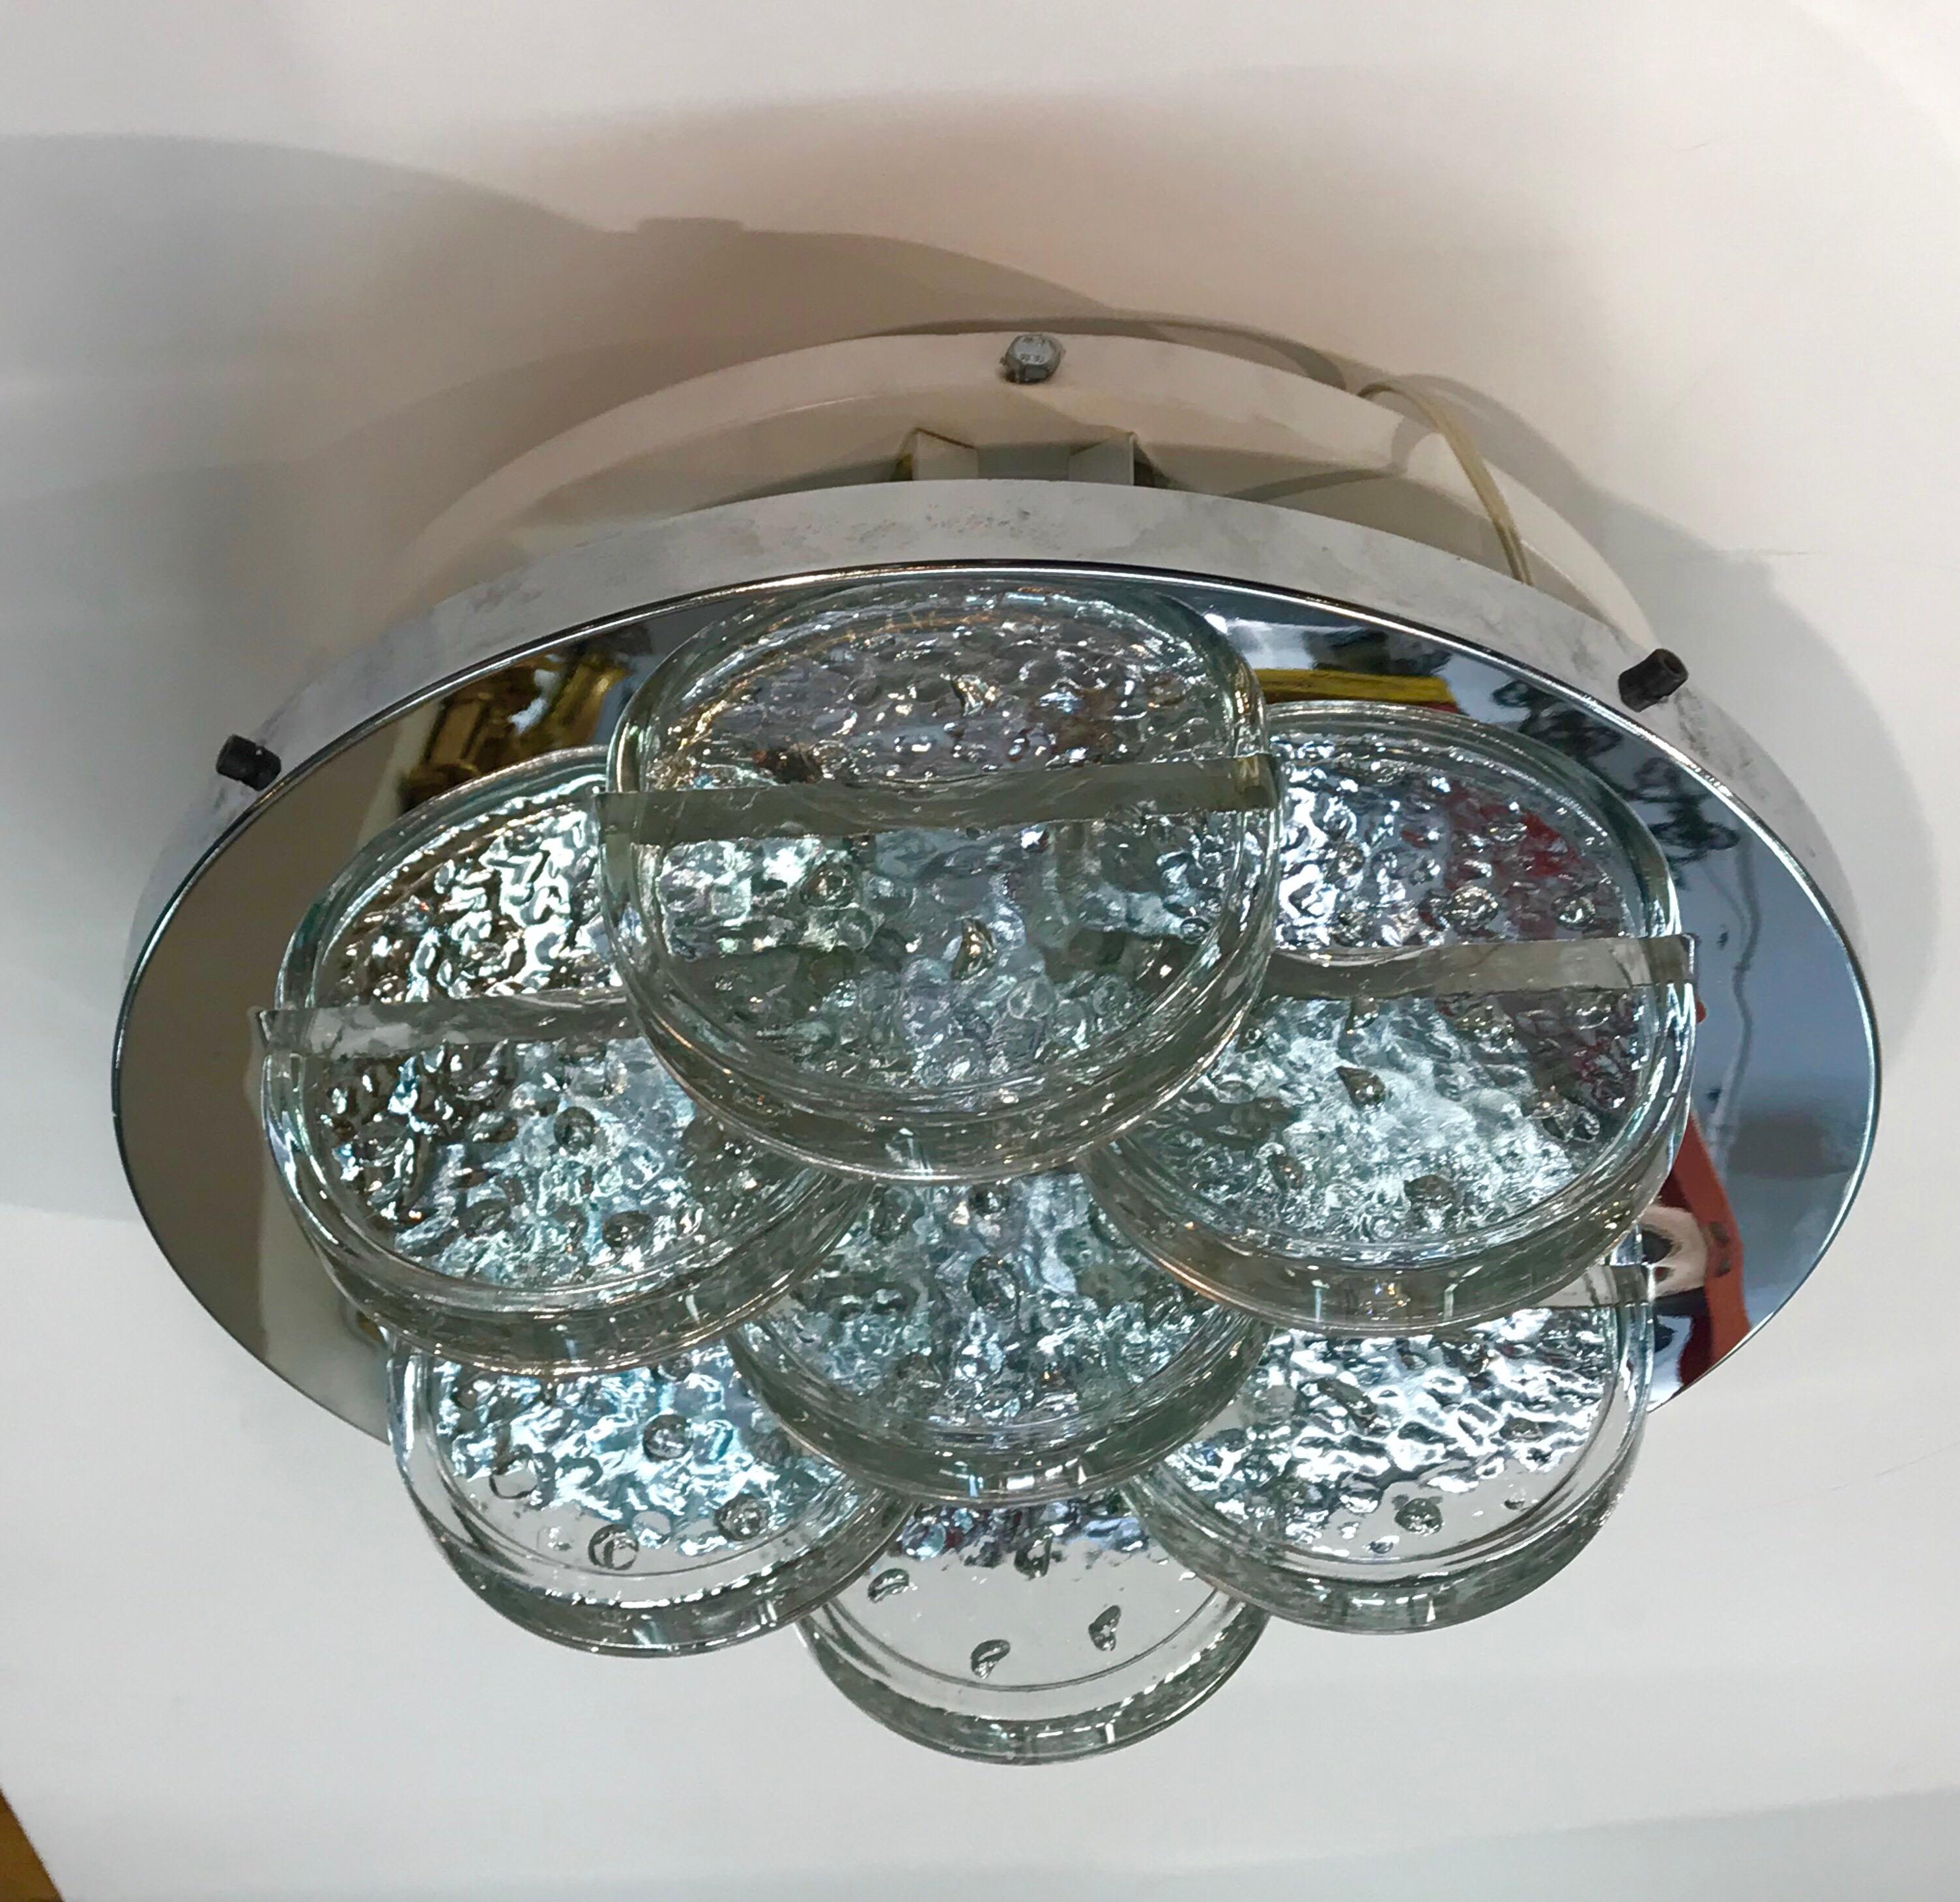 Italian sculptural light fixture in chrome and glass, circa 1970. A chrome plate set with 7 hand formed glass disks is suspended from a white enamel plate that mounts onto the ceiling. The white enamel plate is set with several candelabra sockets.